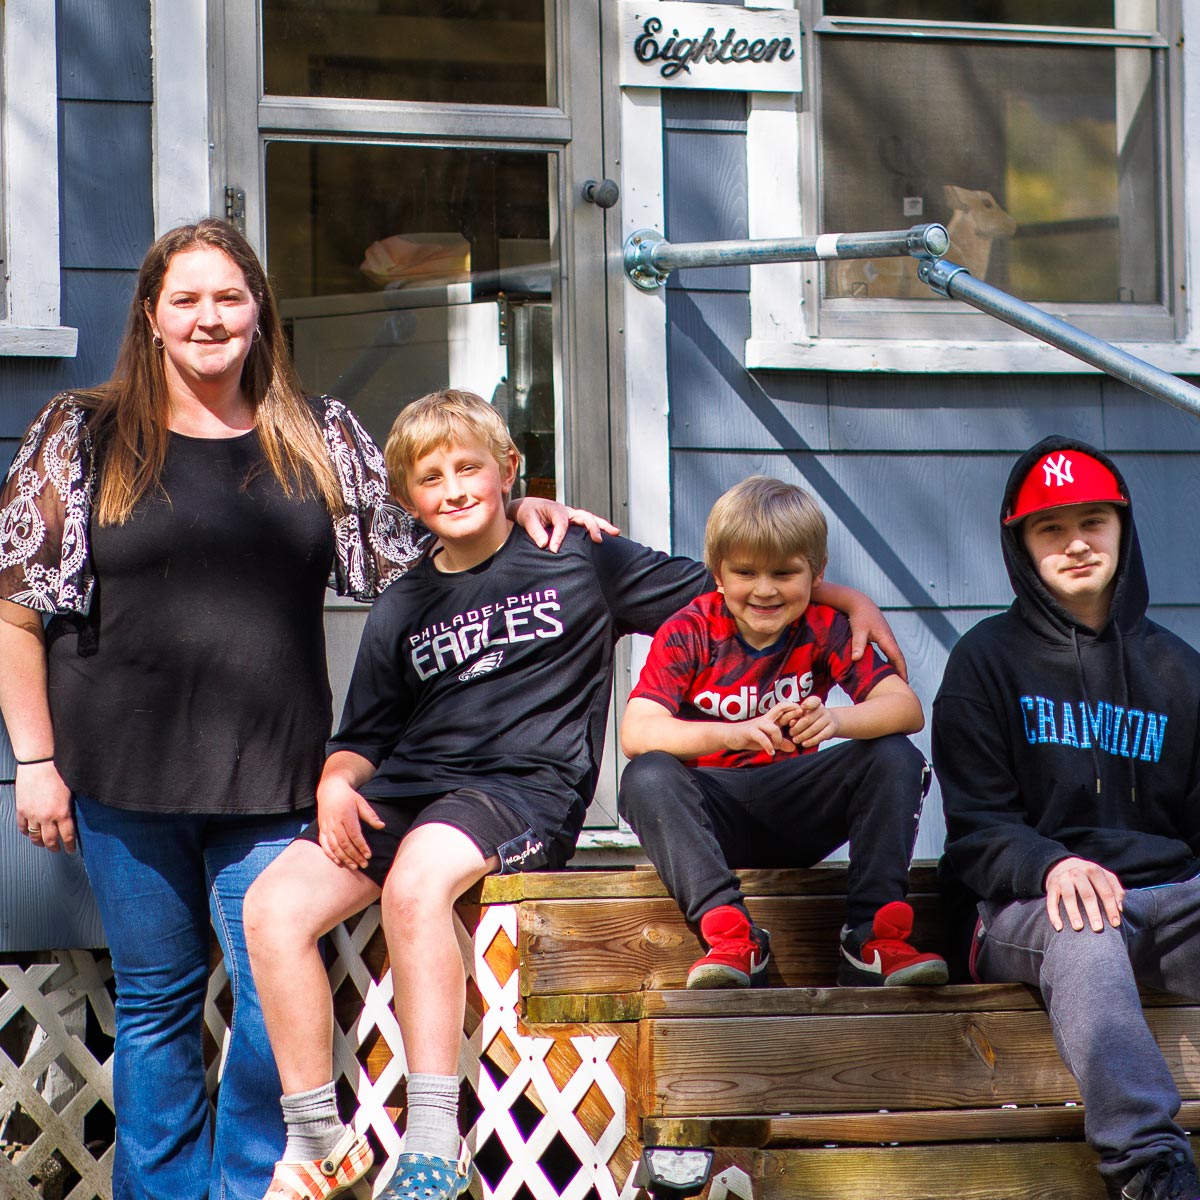 SHAUNNA’S STORY: Finding Hope through Shared Equity Homeownership